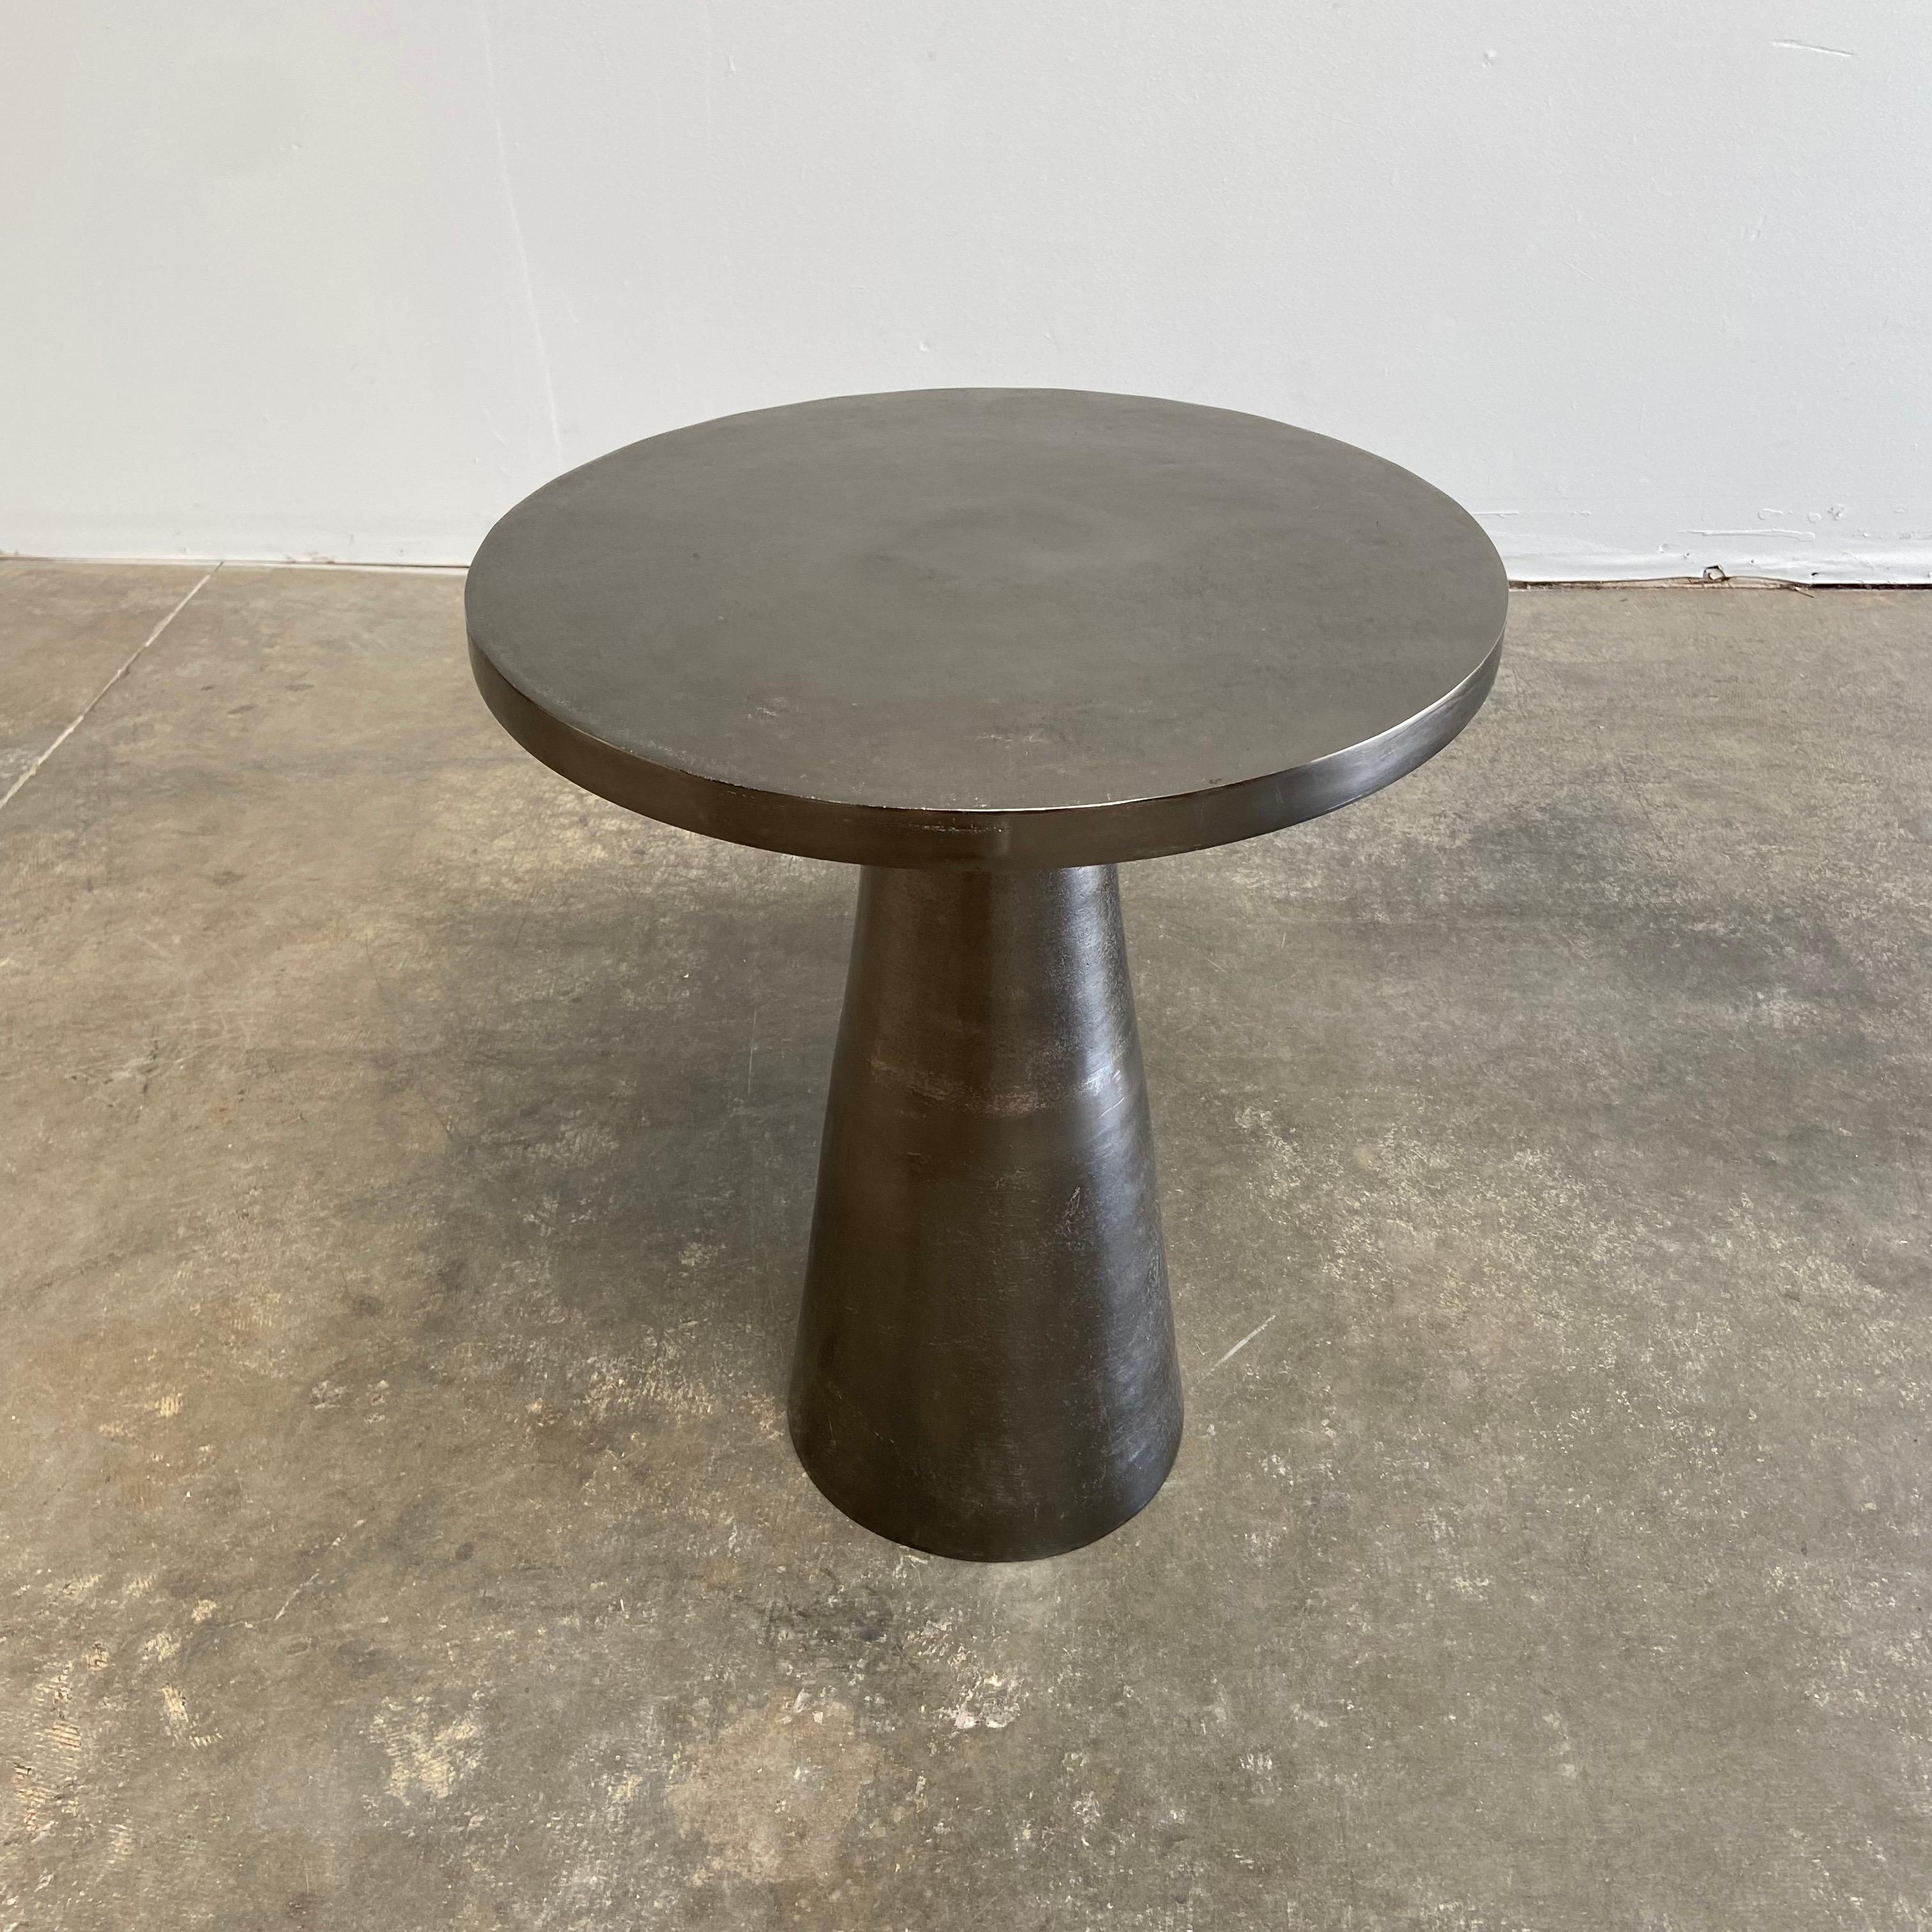 Antique pewter colored side side table.
Top has an antique patina, to look as if it is aged. Its sleek clean moder edge is smooth, this table is light weight, easy to use anywhere in the home.
Size: 19-1/2” RD. X 23” H.